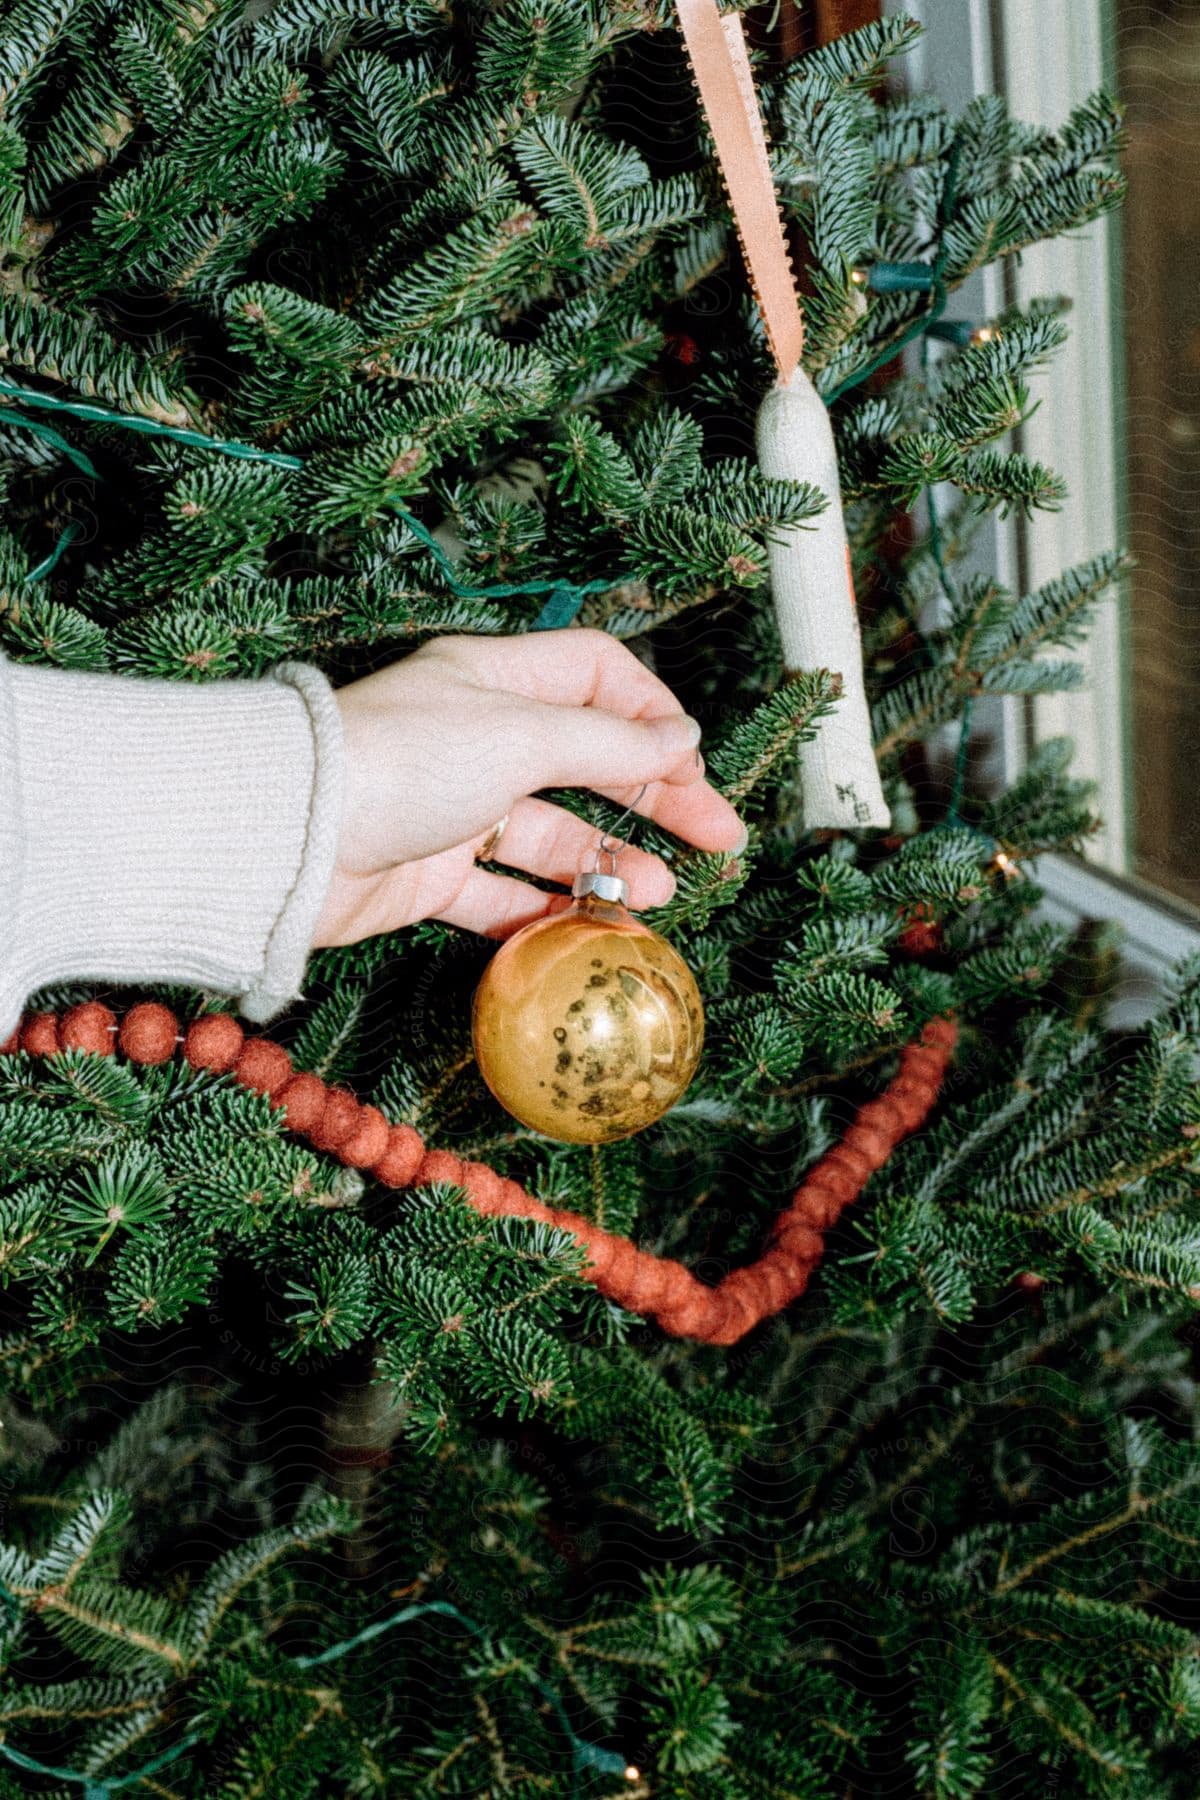 A person hangs a gold, glass ornament on a Christmas tree.